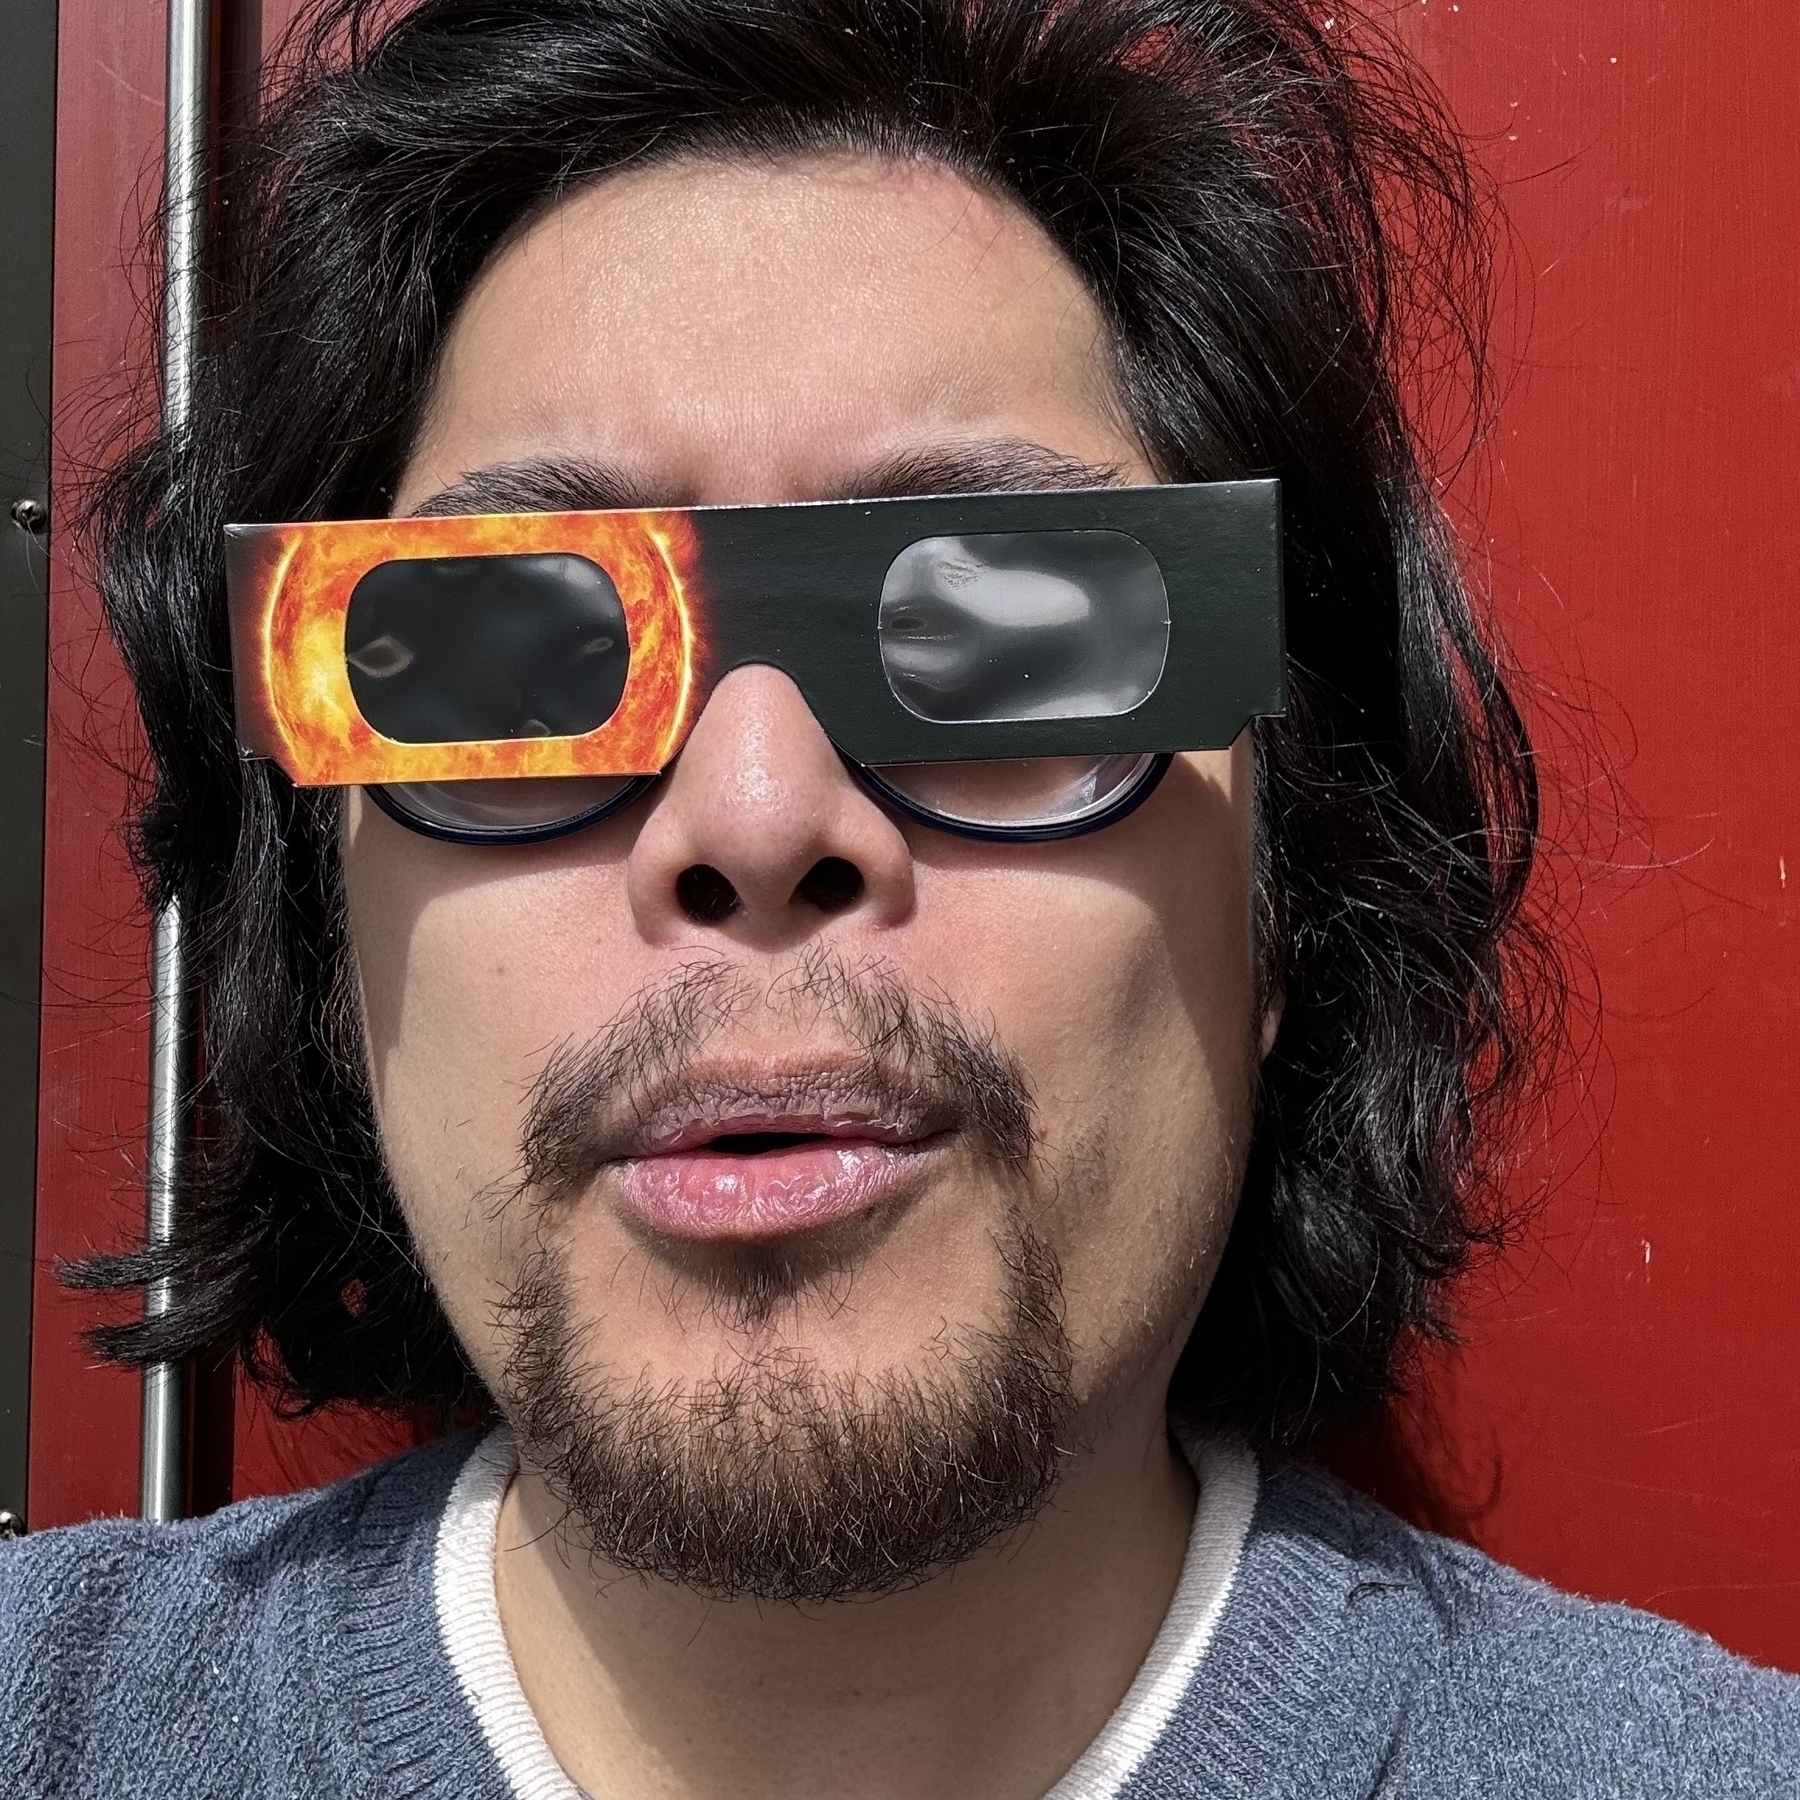  A selfie of a person wearing paper eclipse glasses with an image of the sun printed on them.